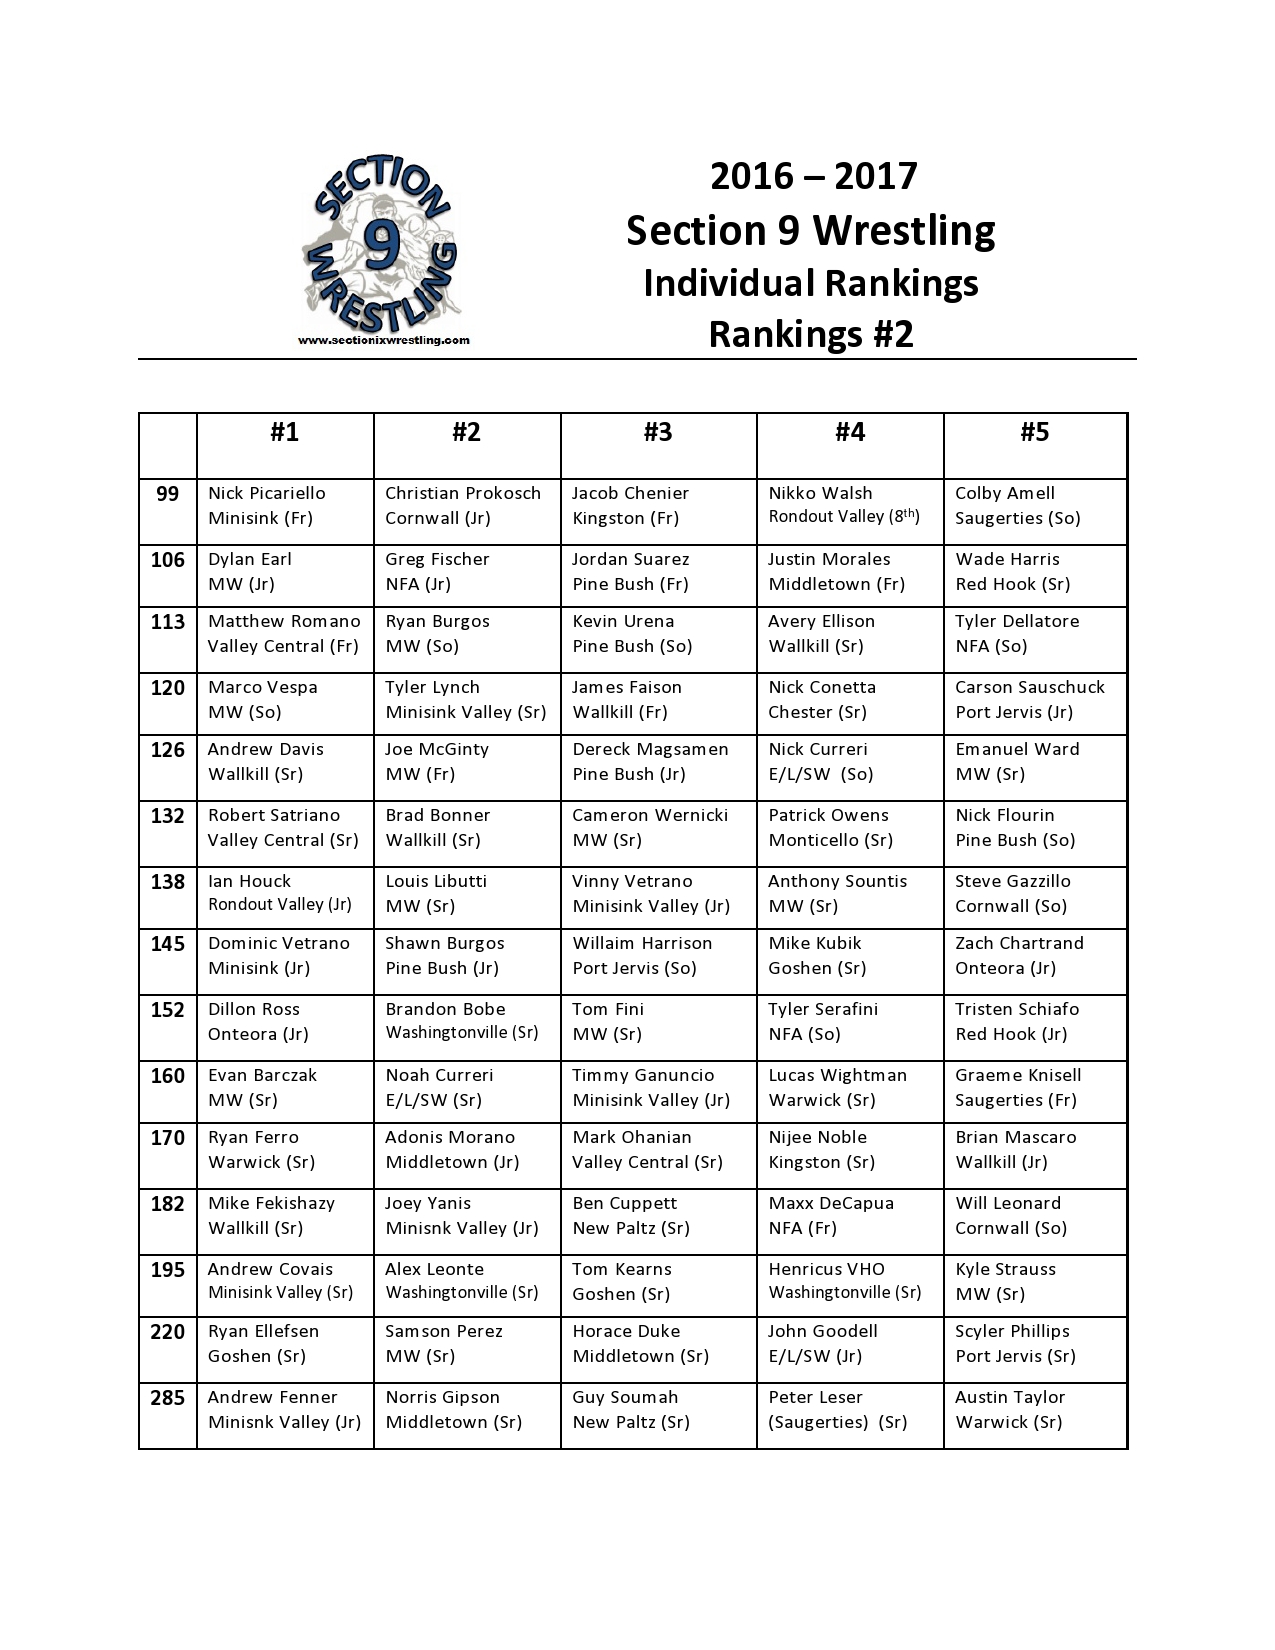 Section 9 Rankings 2 SECTION 9 WRESTLING